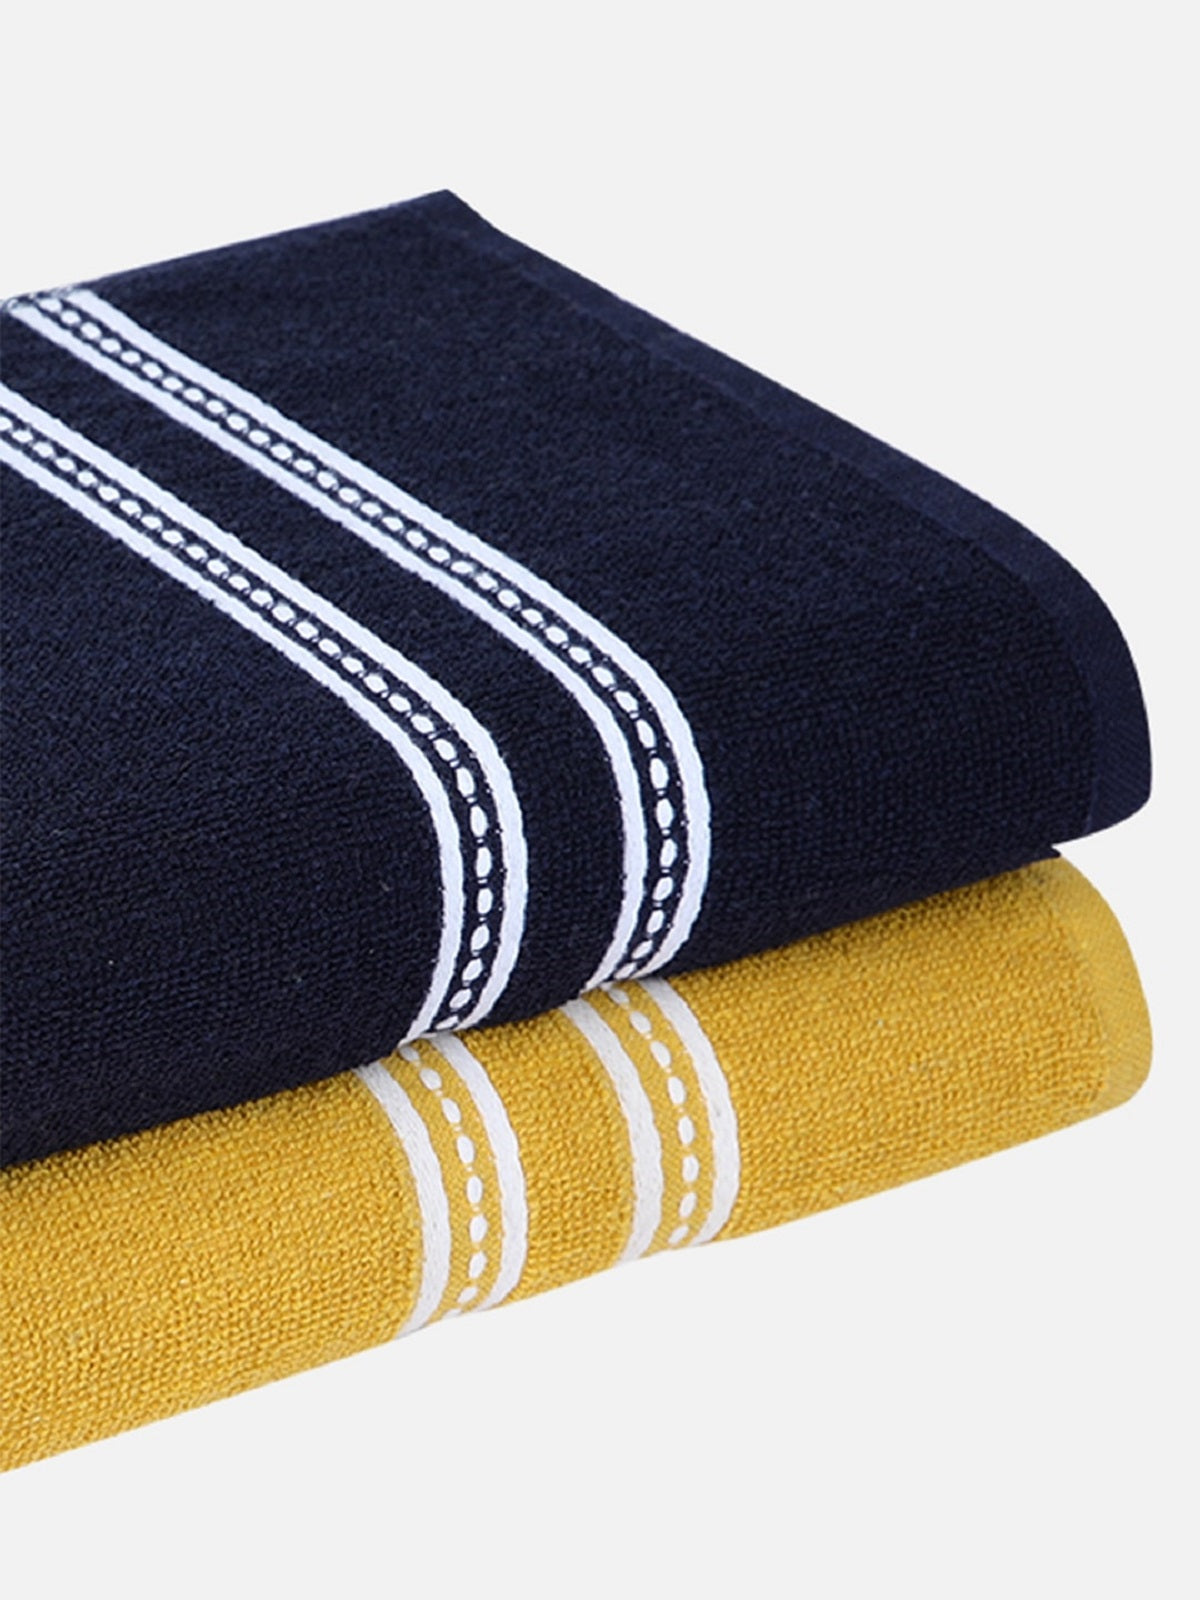 Set of 2 Yellow & Dark Blue Solid Cotton Towels